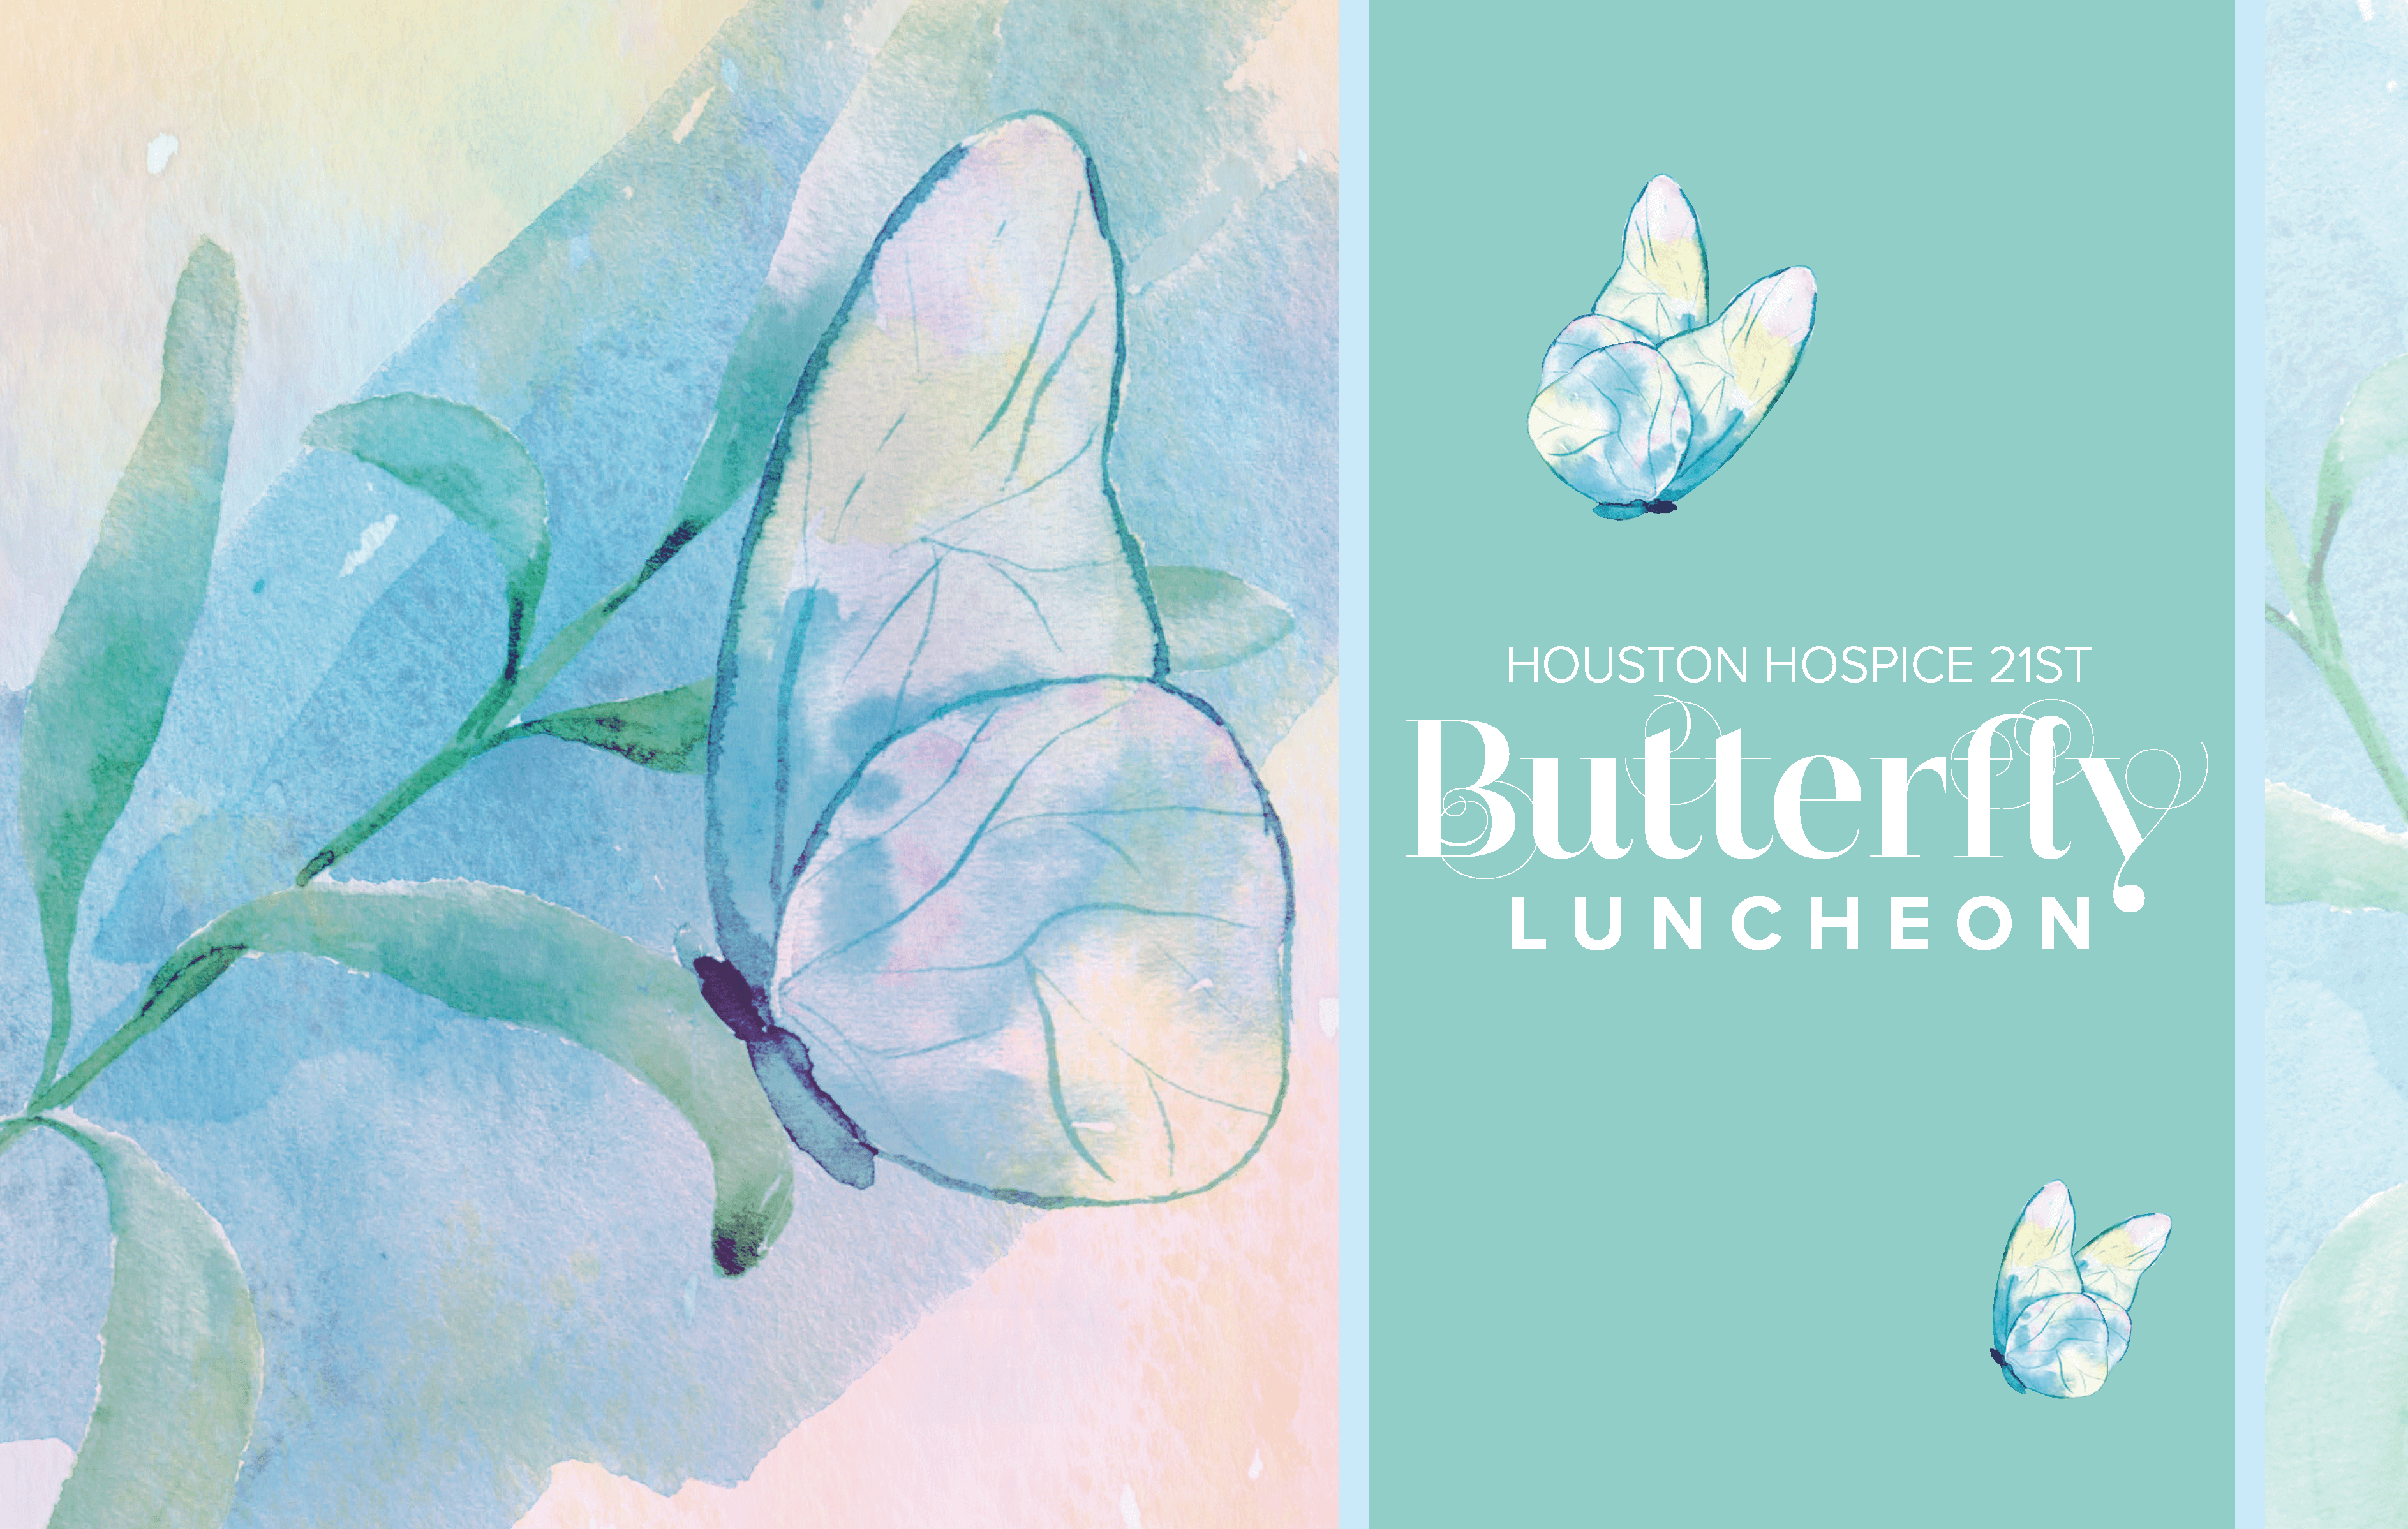 21st Annual Houston Hospice Butterfly Luncheon